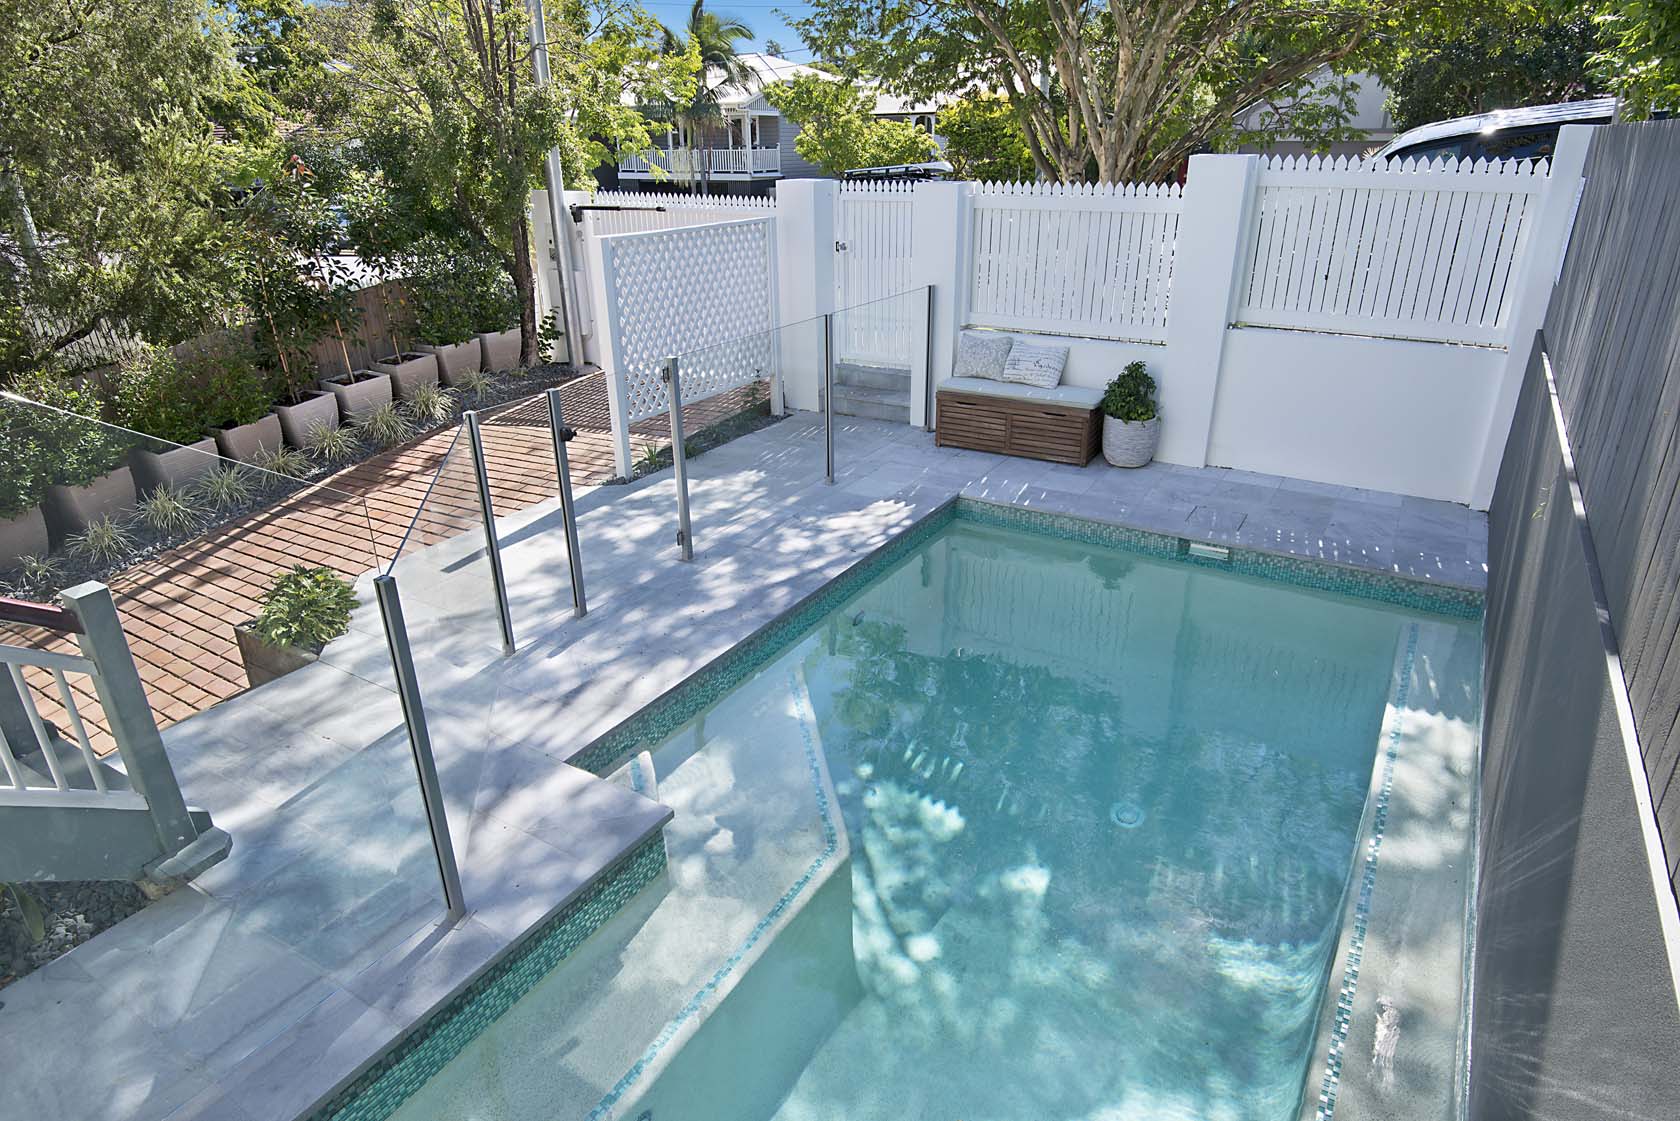 Parisian Blue Limestone pool coping and surrounds with Aqua Crystal Blend waterline tiles